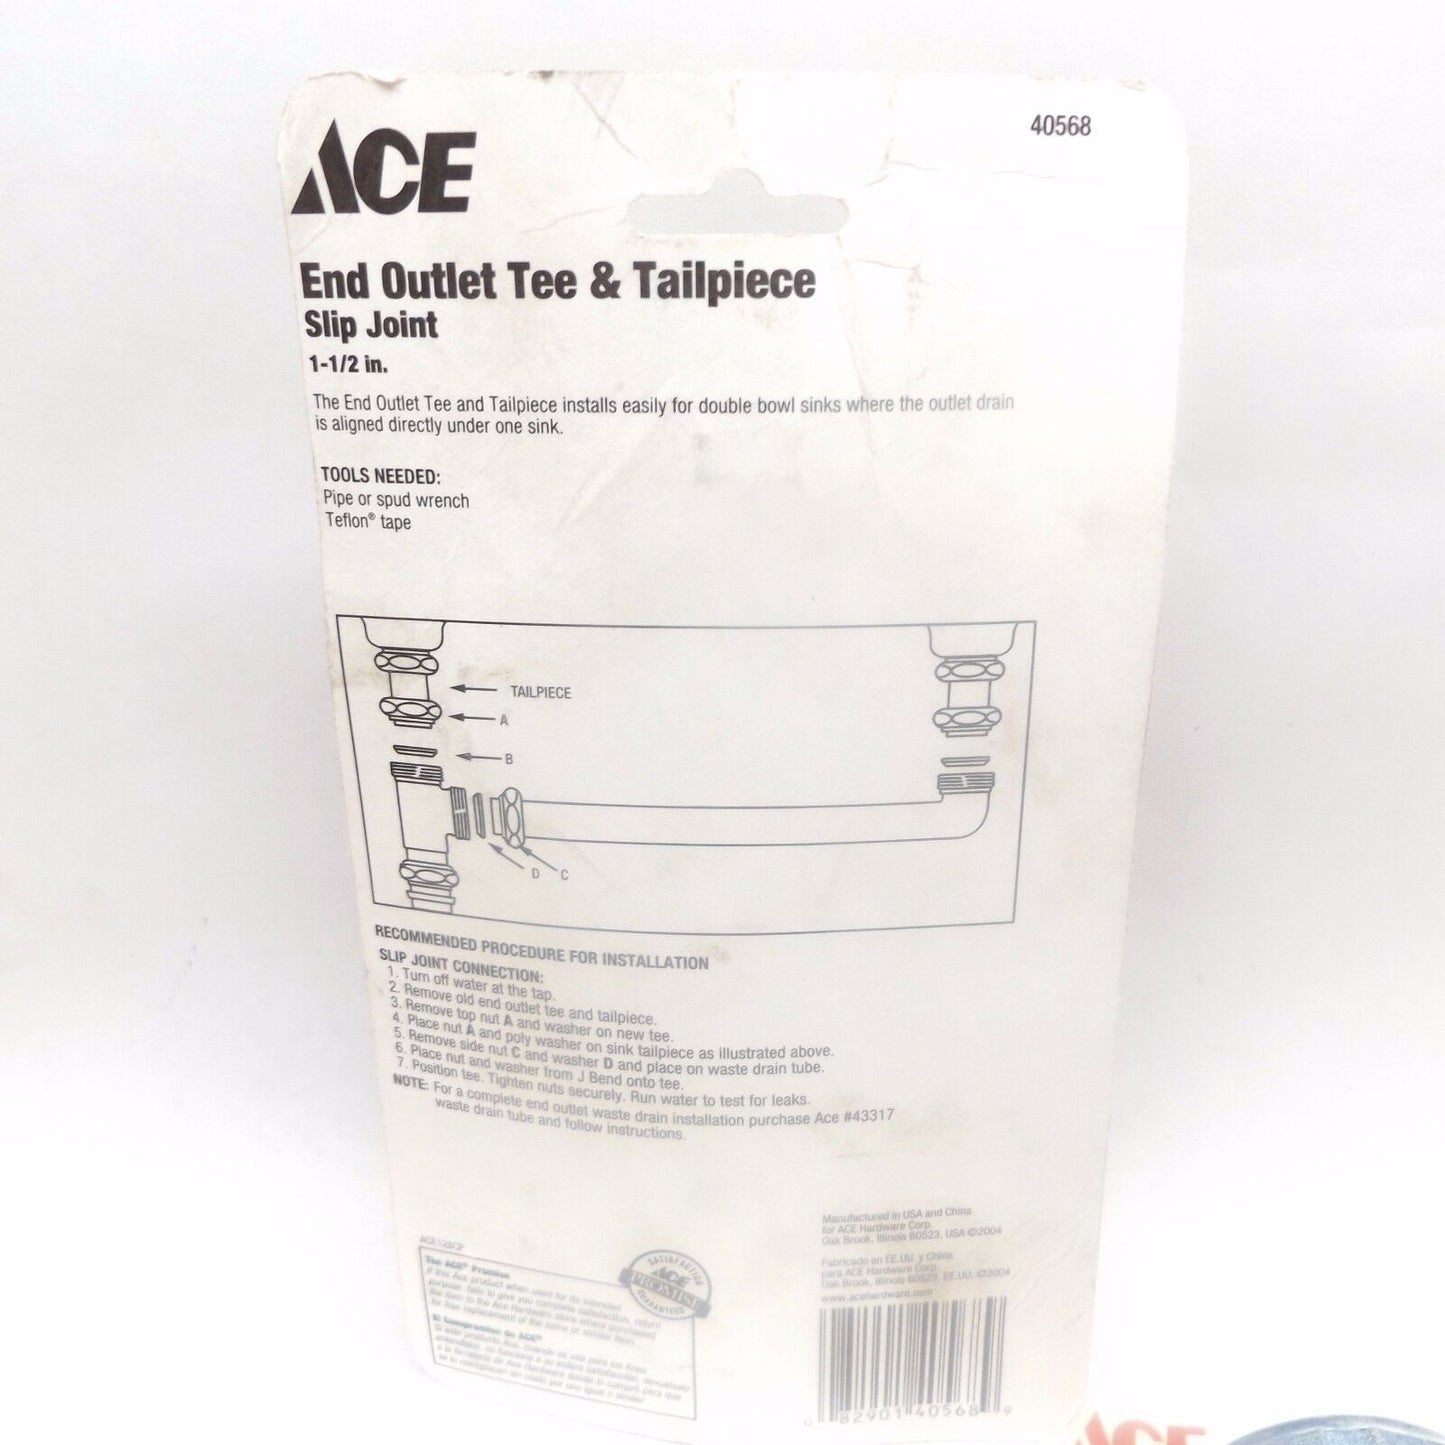 LOT OF 7 - ACE 40568 ACE128CP 1-1/2" END OUTLET TEE & TAILPIECE 22 GA, METAL